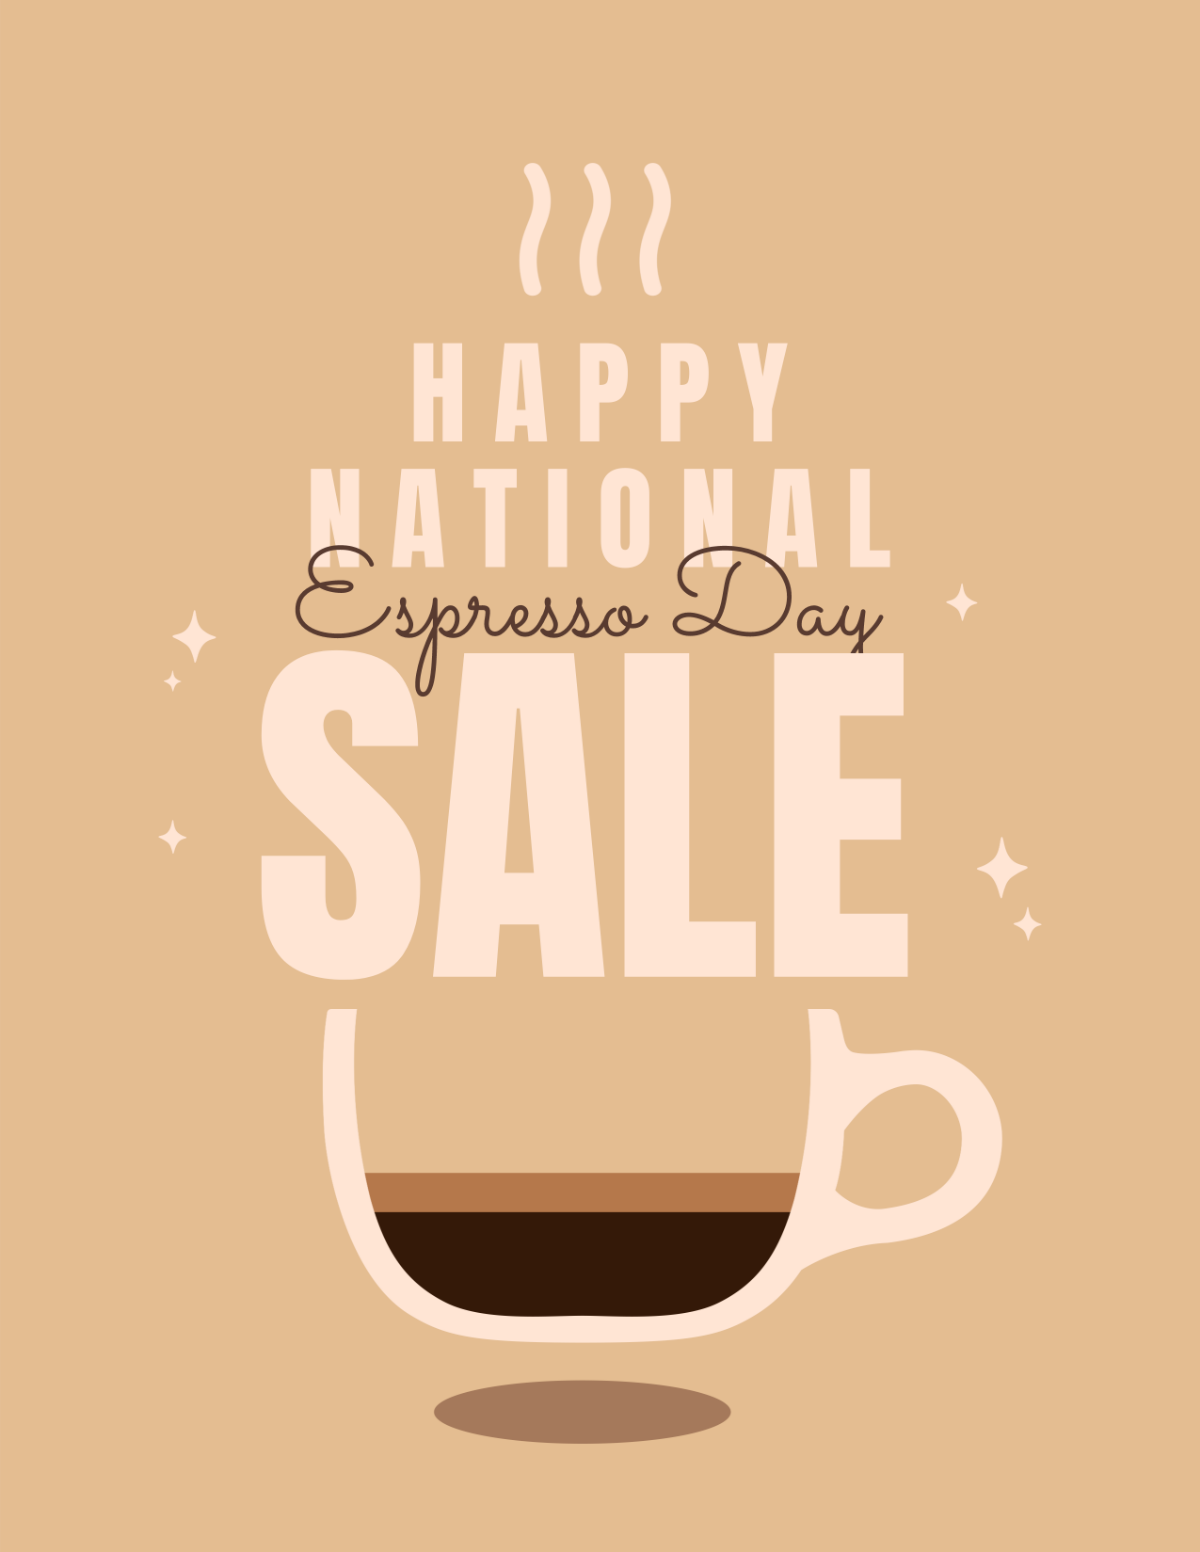 National Espresso Day Sales Flyer Template